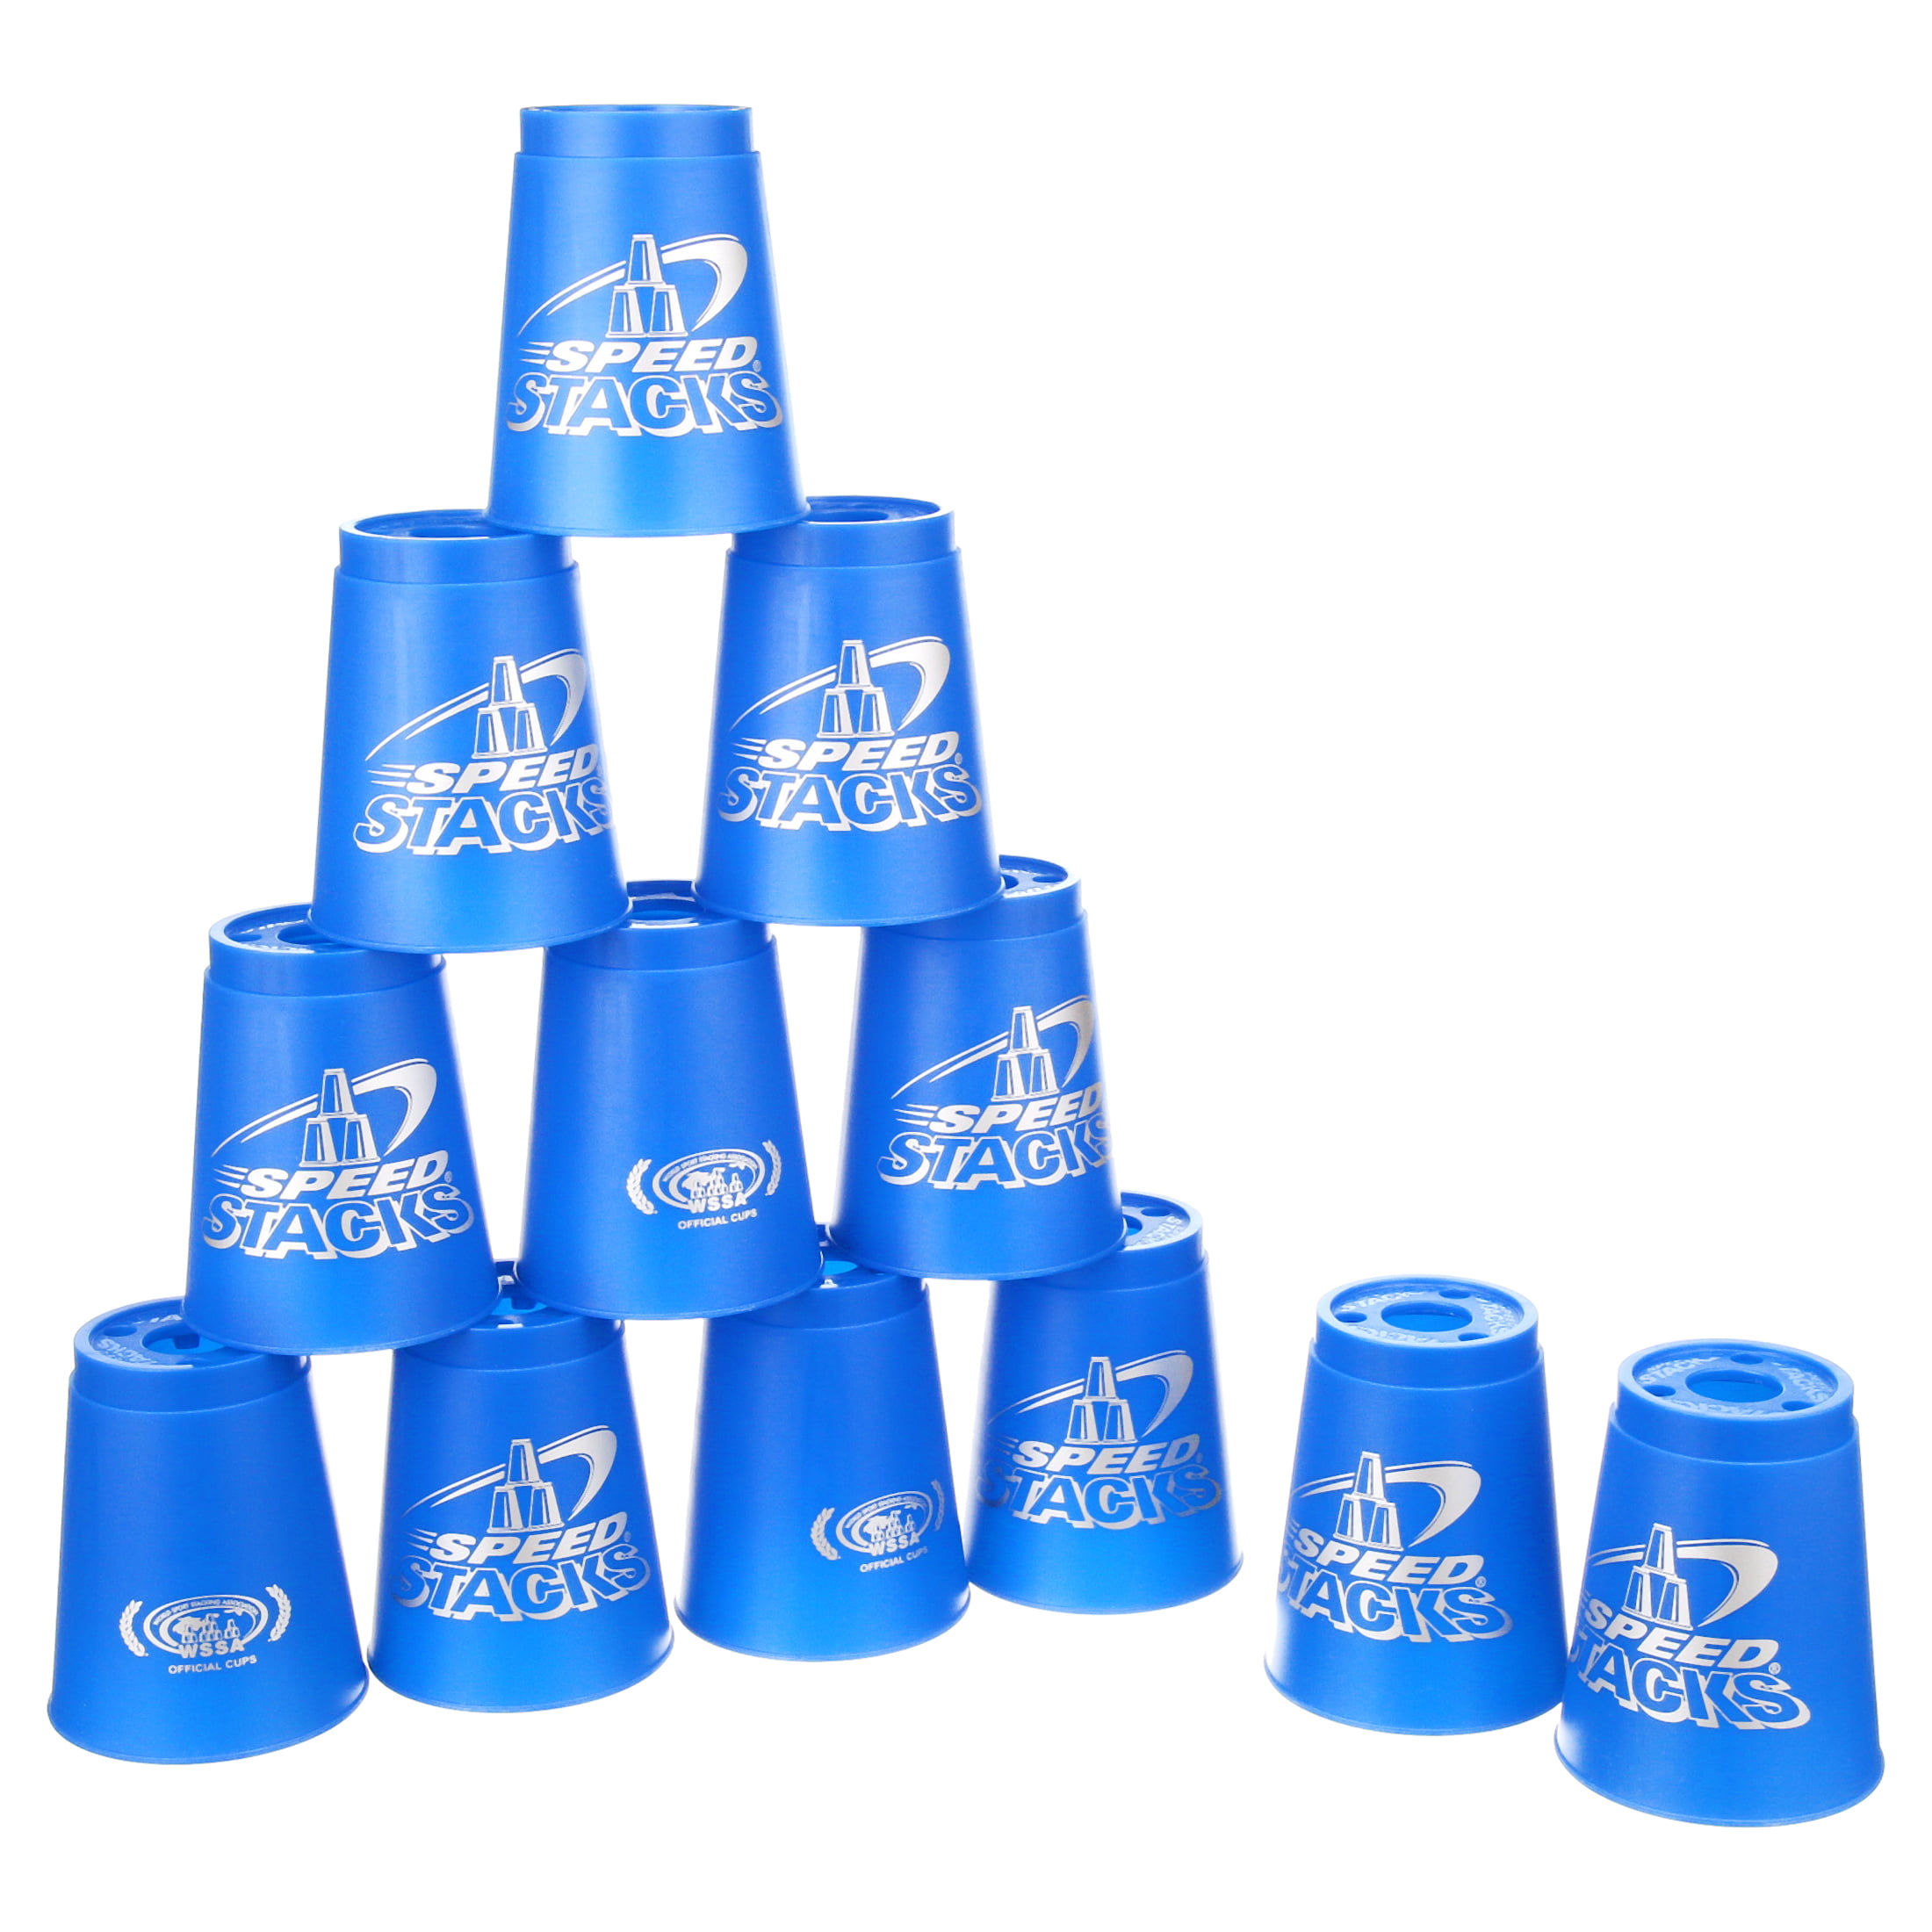 Pressman Toys Speed Stacks Competition Stack Pack 